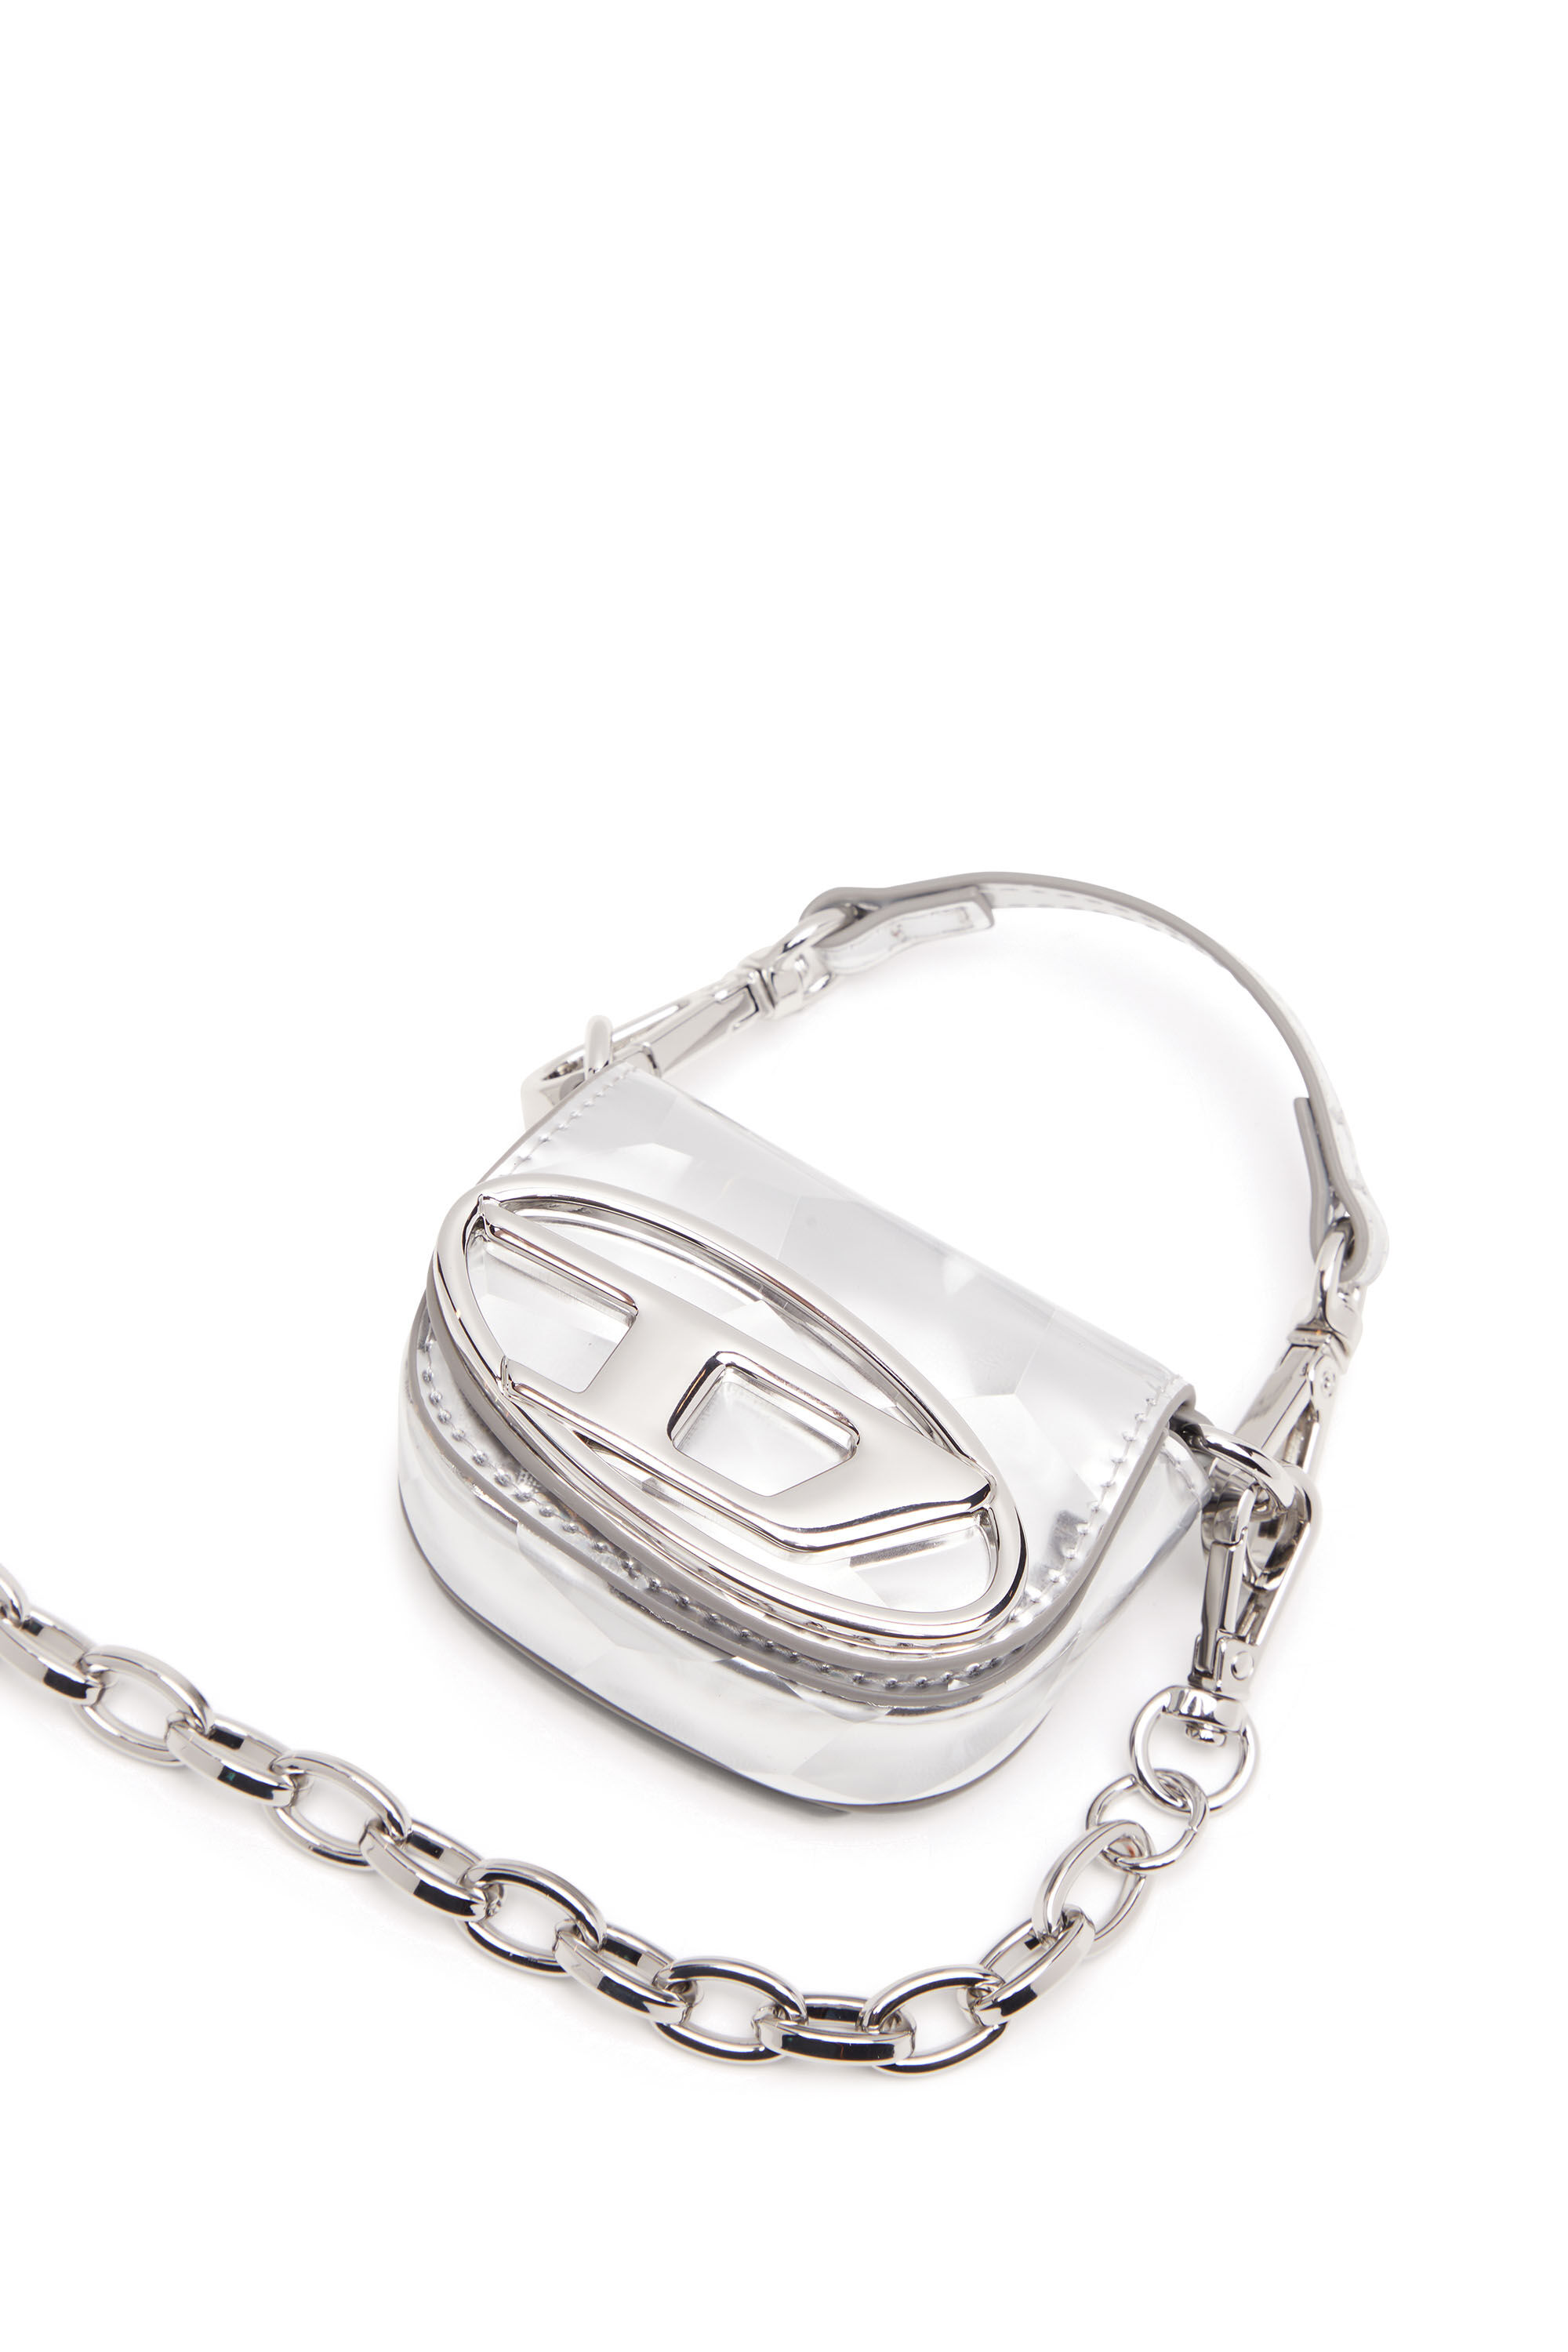 1DR XXS Iconic micro bag charm with mirror effect｜シルバー 